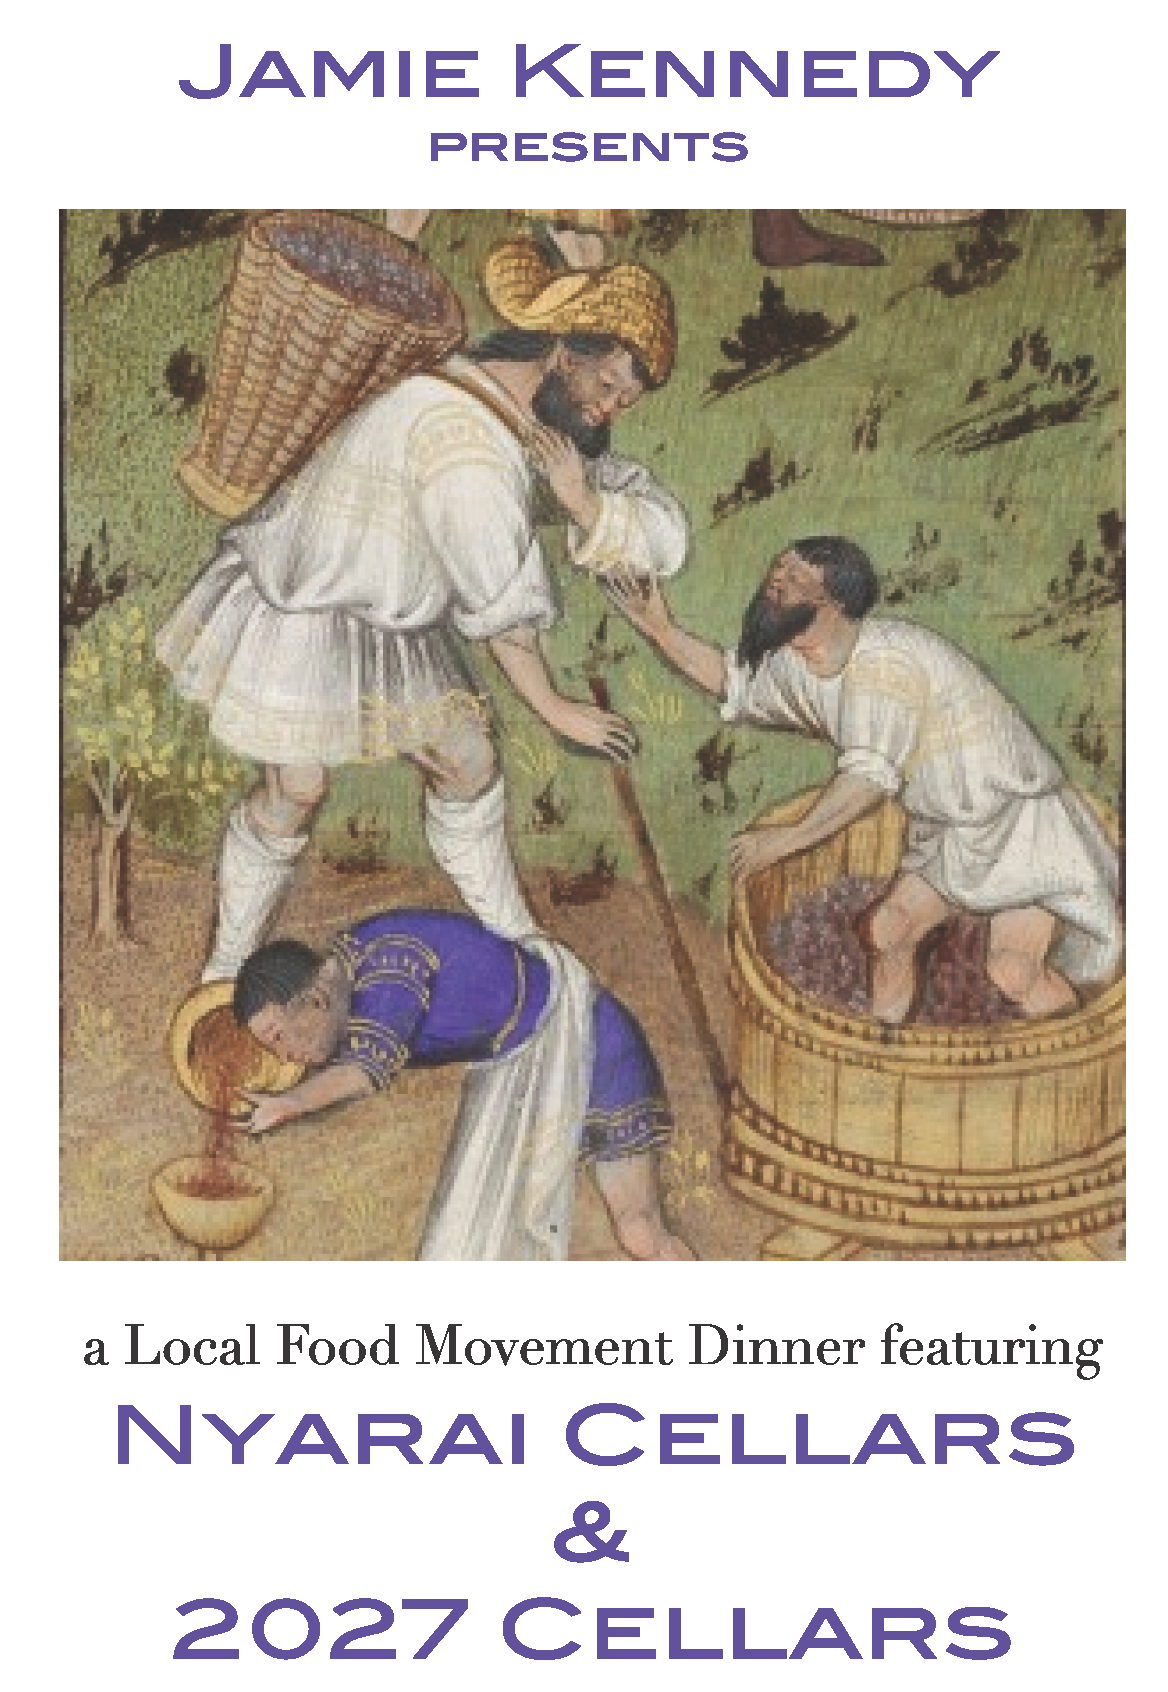 Jamie Kennedy presents a Local Food Movement Dinner with Nyarai Cellars & 2027 Cellars